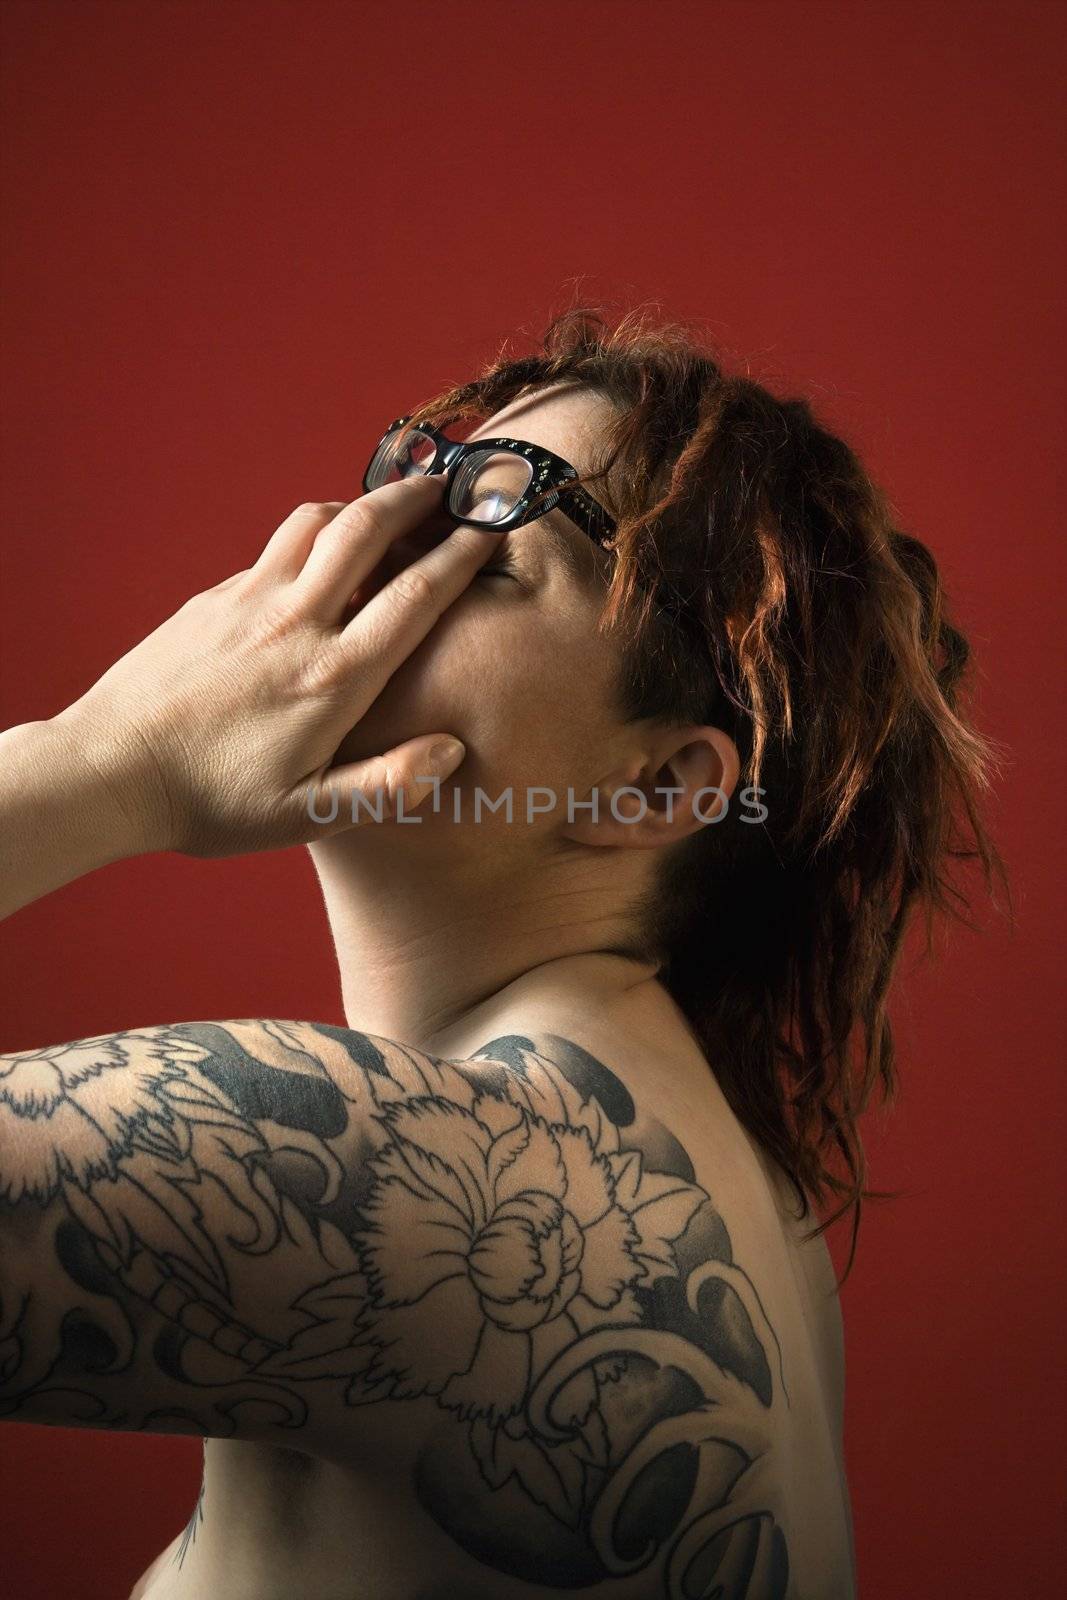 Adult woman with tattoos rubbng her eyes.